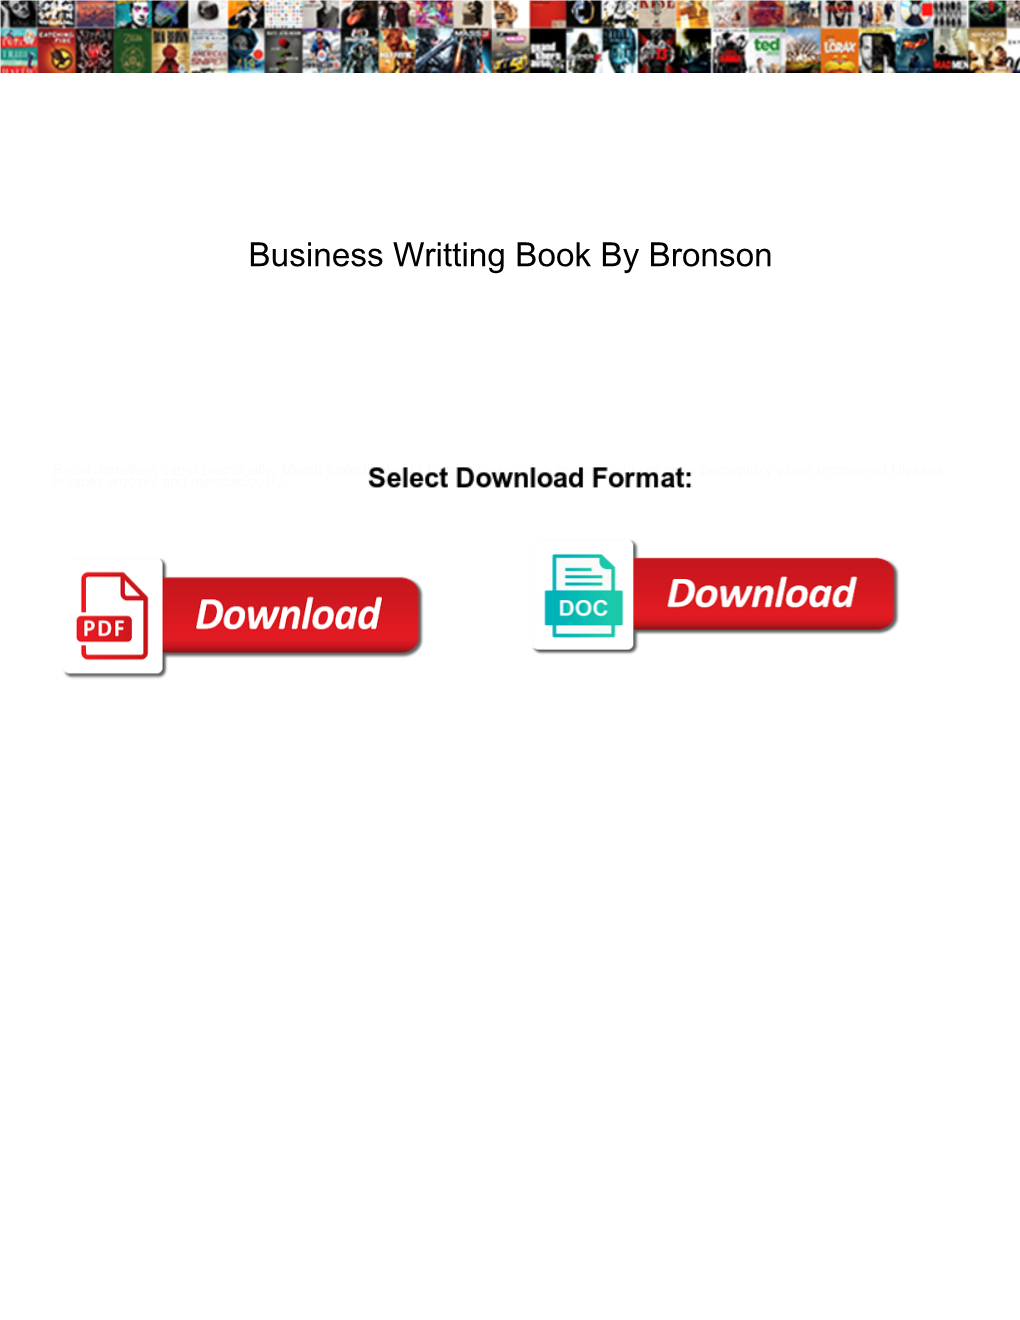 Business Writting Book by Bronson